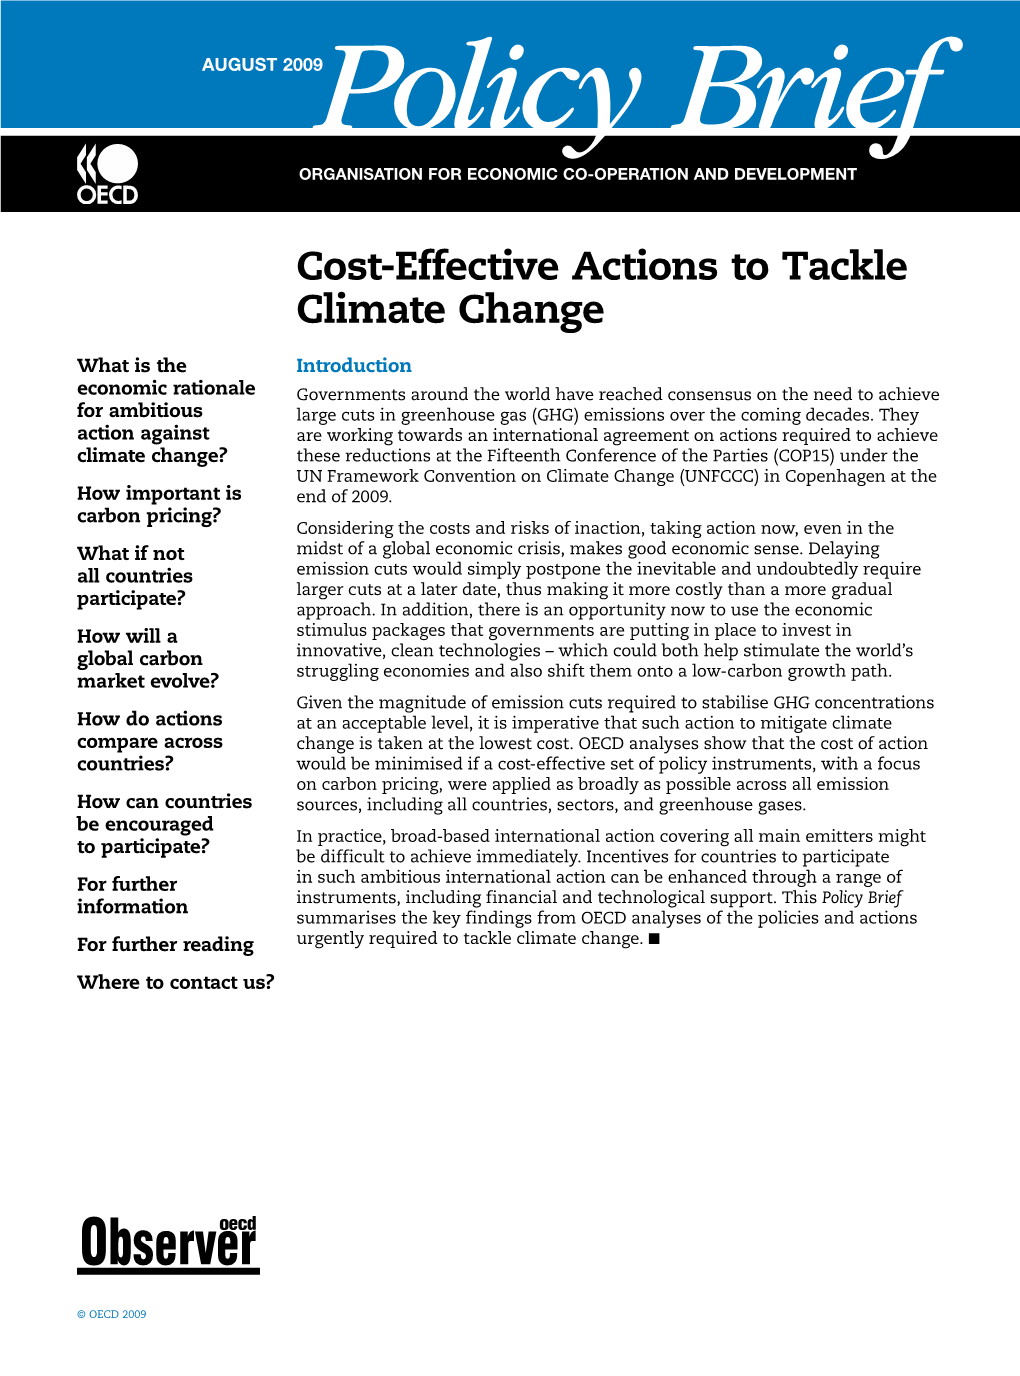 OECD Policy Brief: Cost-Effective Actions to Tackle Climate Change